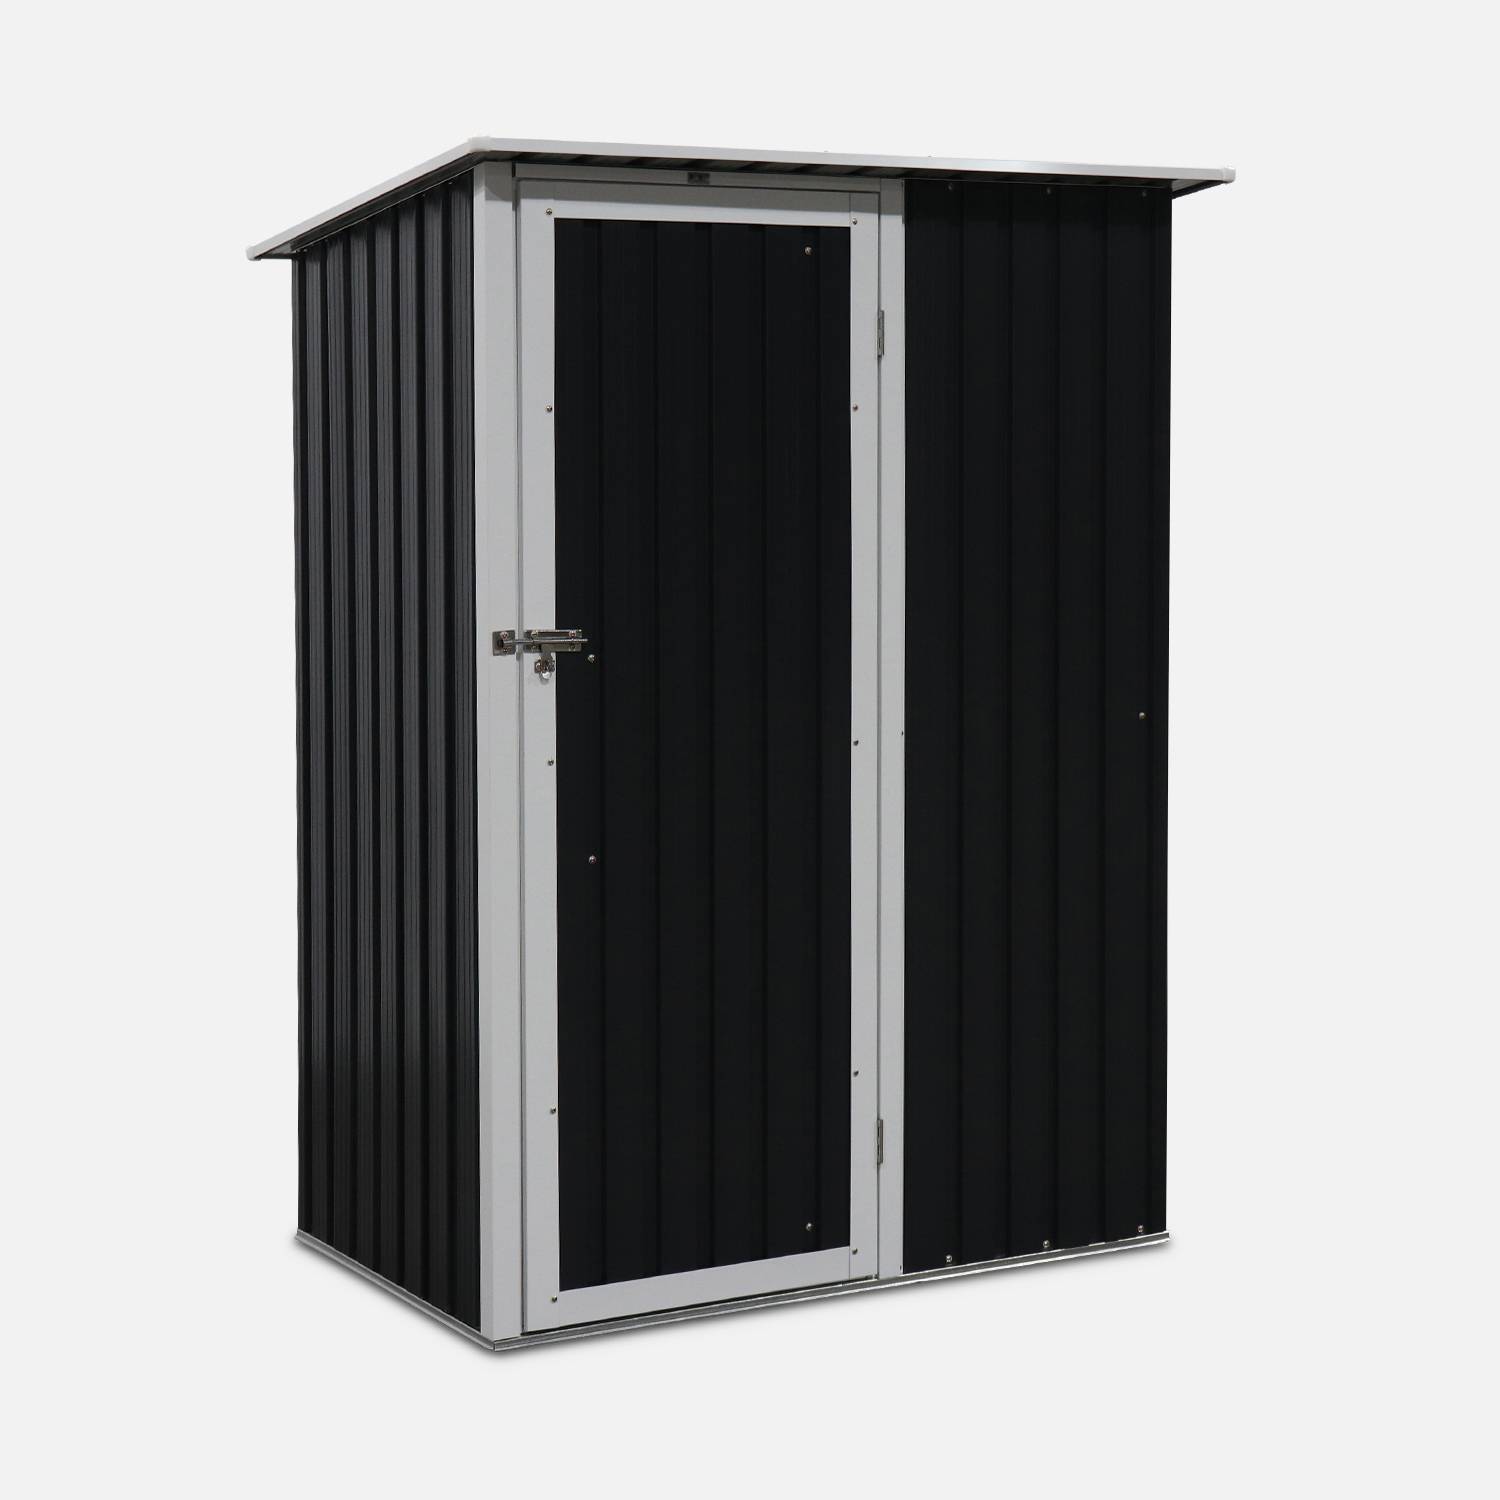 (4.6 X 3.1FT) 1.36m² Metal garden shed - Tool shed with single latch door, ground fixing kit supplied - Lys - Grey and White Photo1